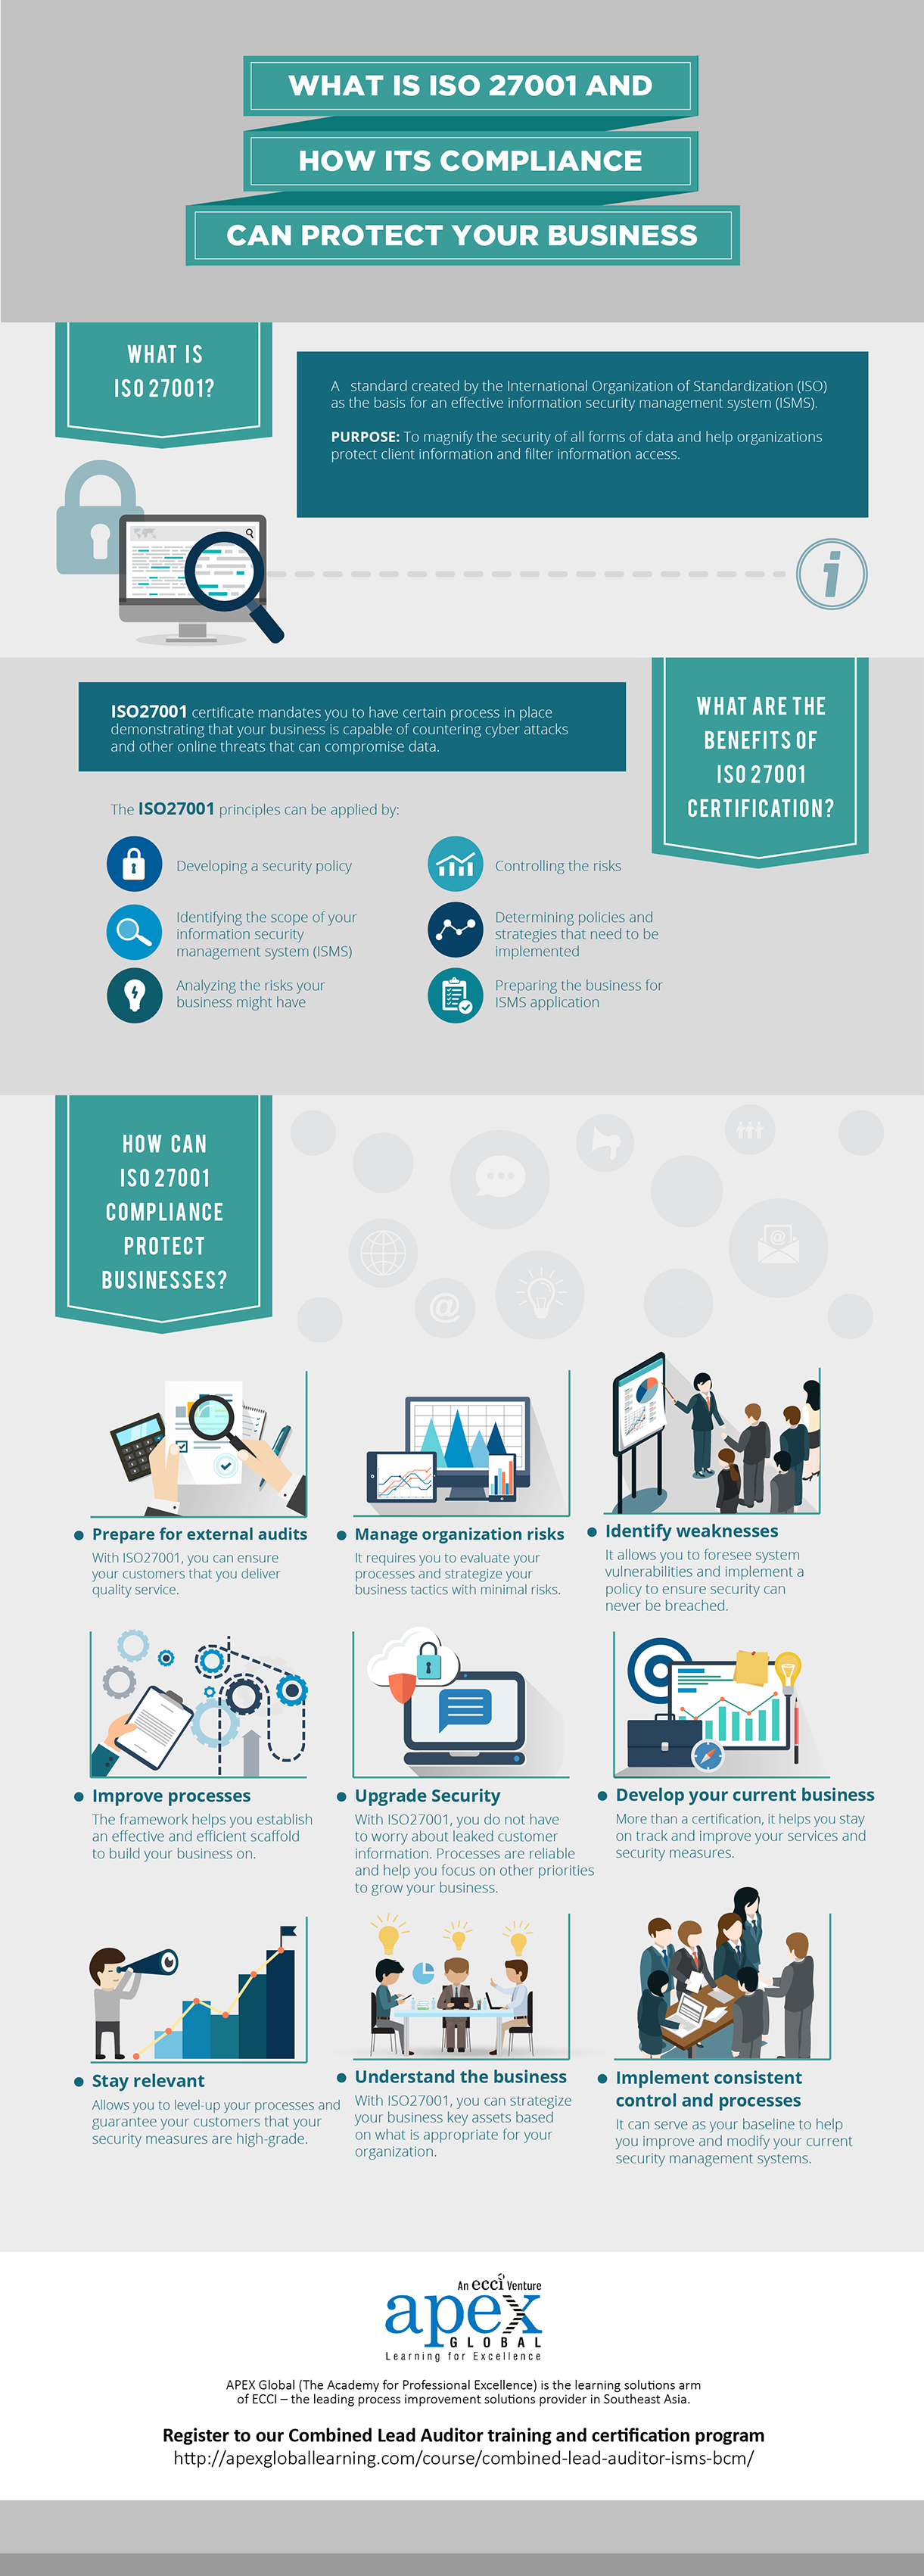 it-project-cost-management-guide-5-tips-to-success-infographic-01-1